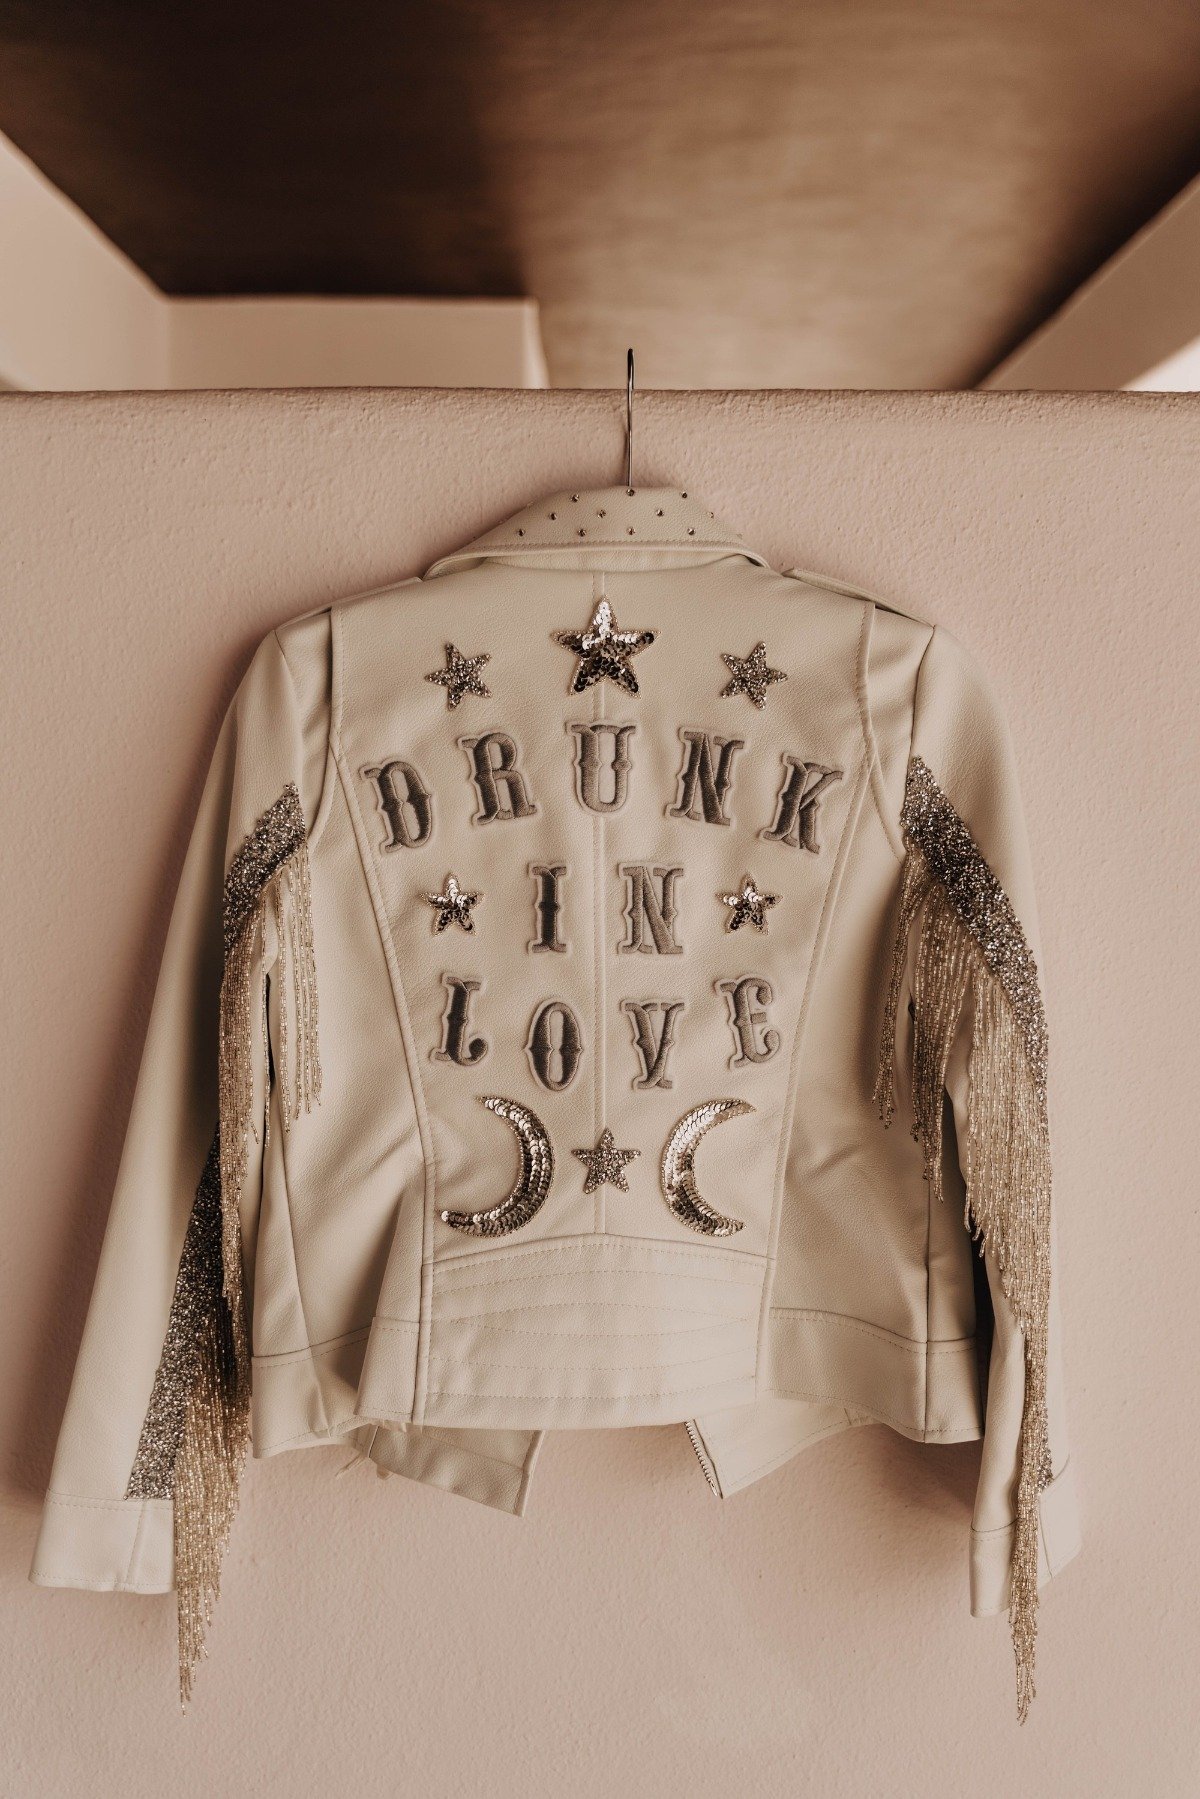 Drunk in Love wedding jacket with silver fringe by Ally Jacqueline